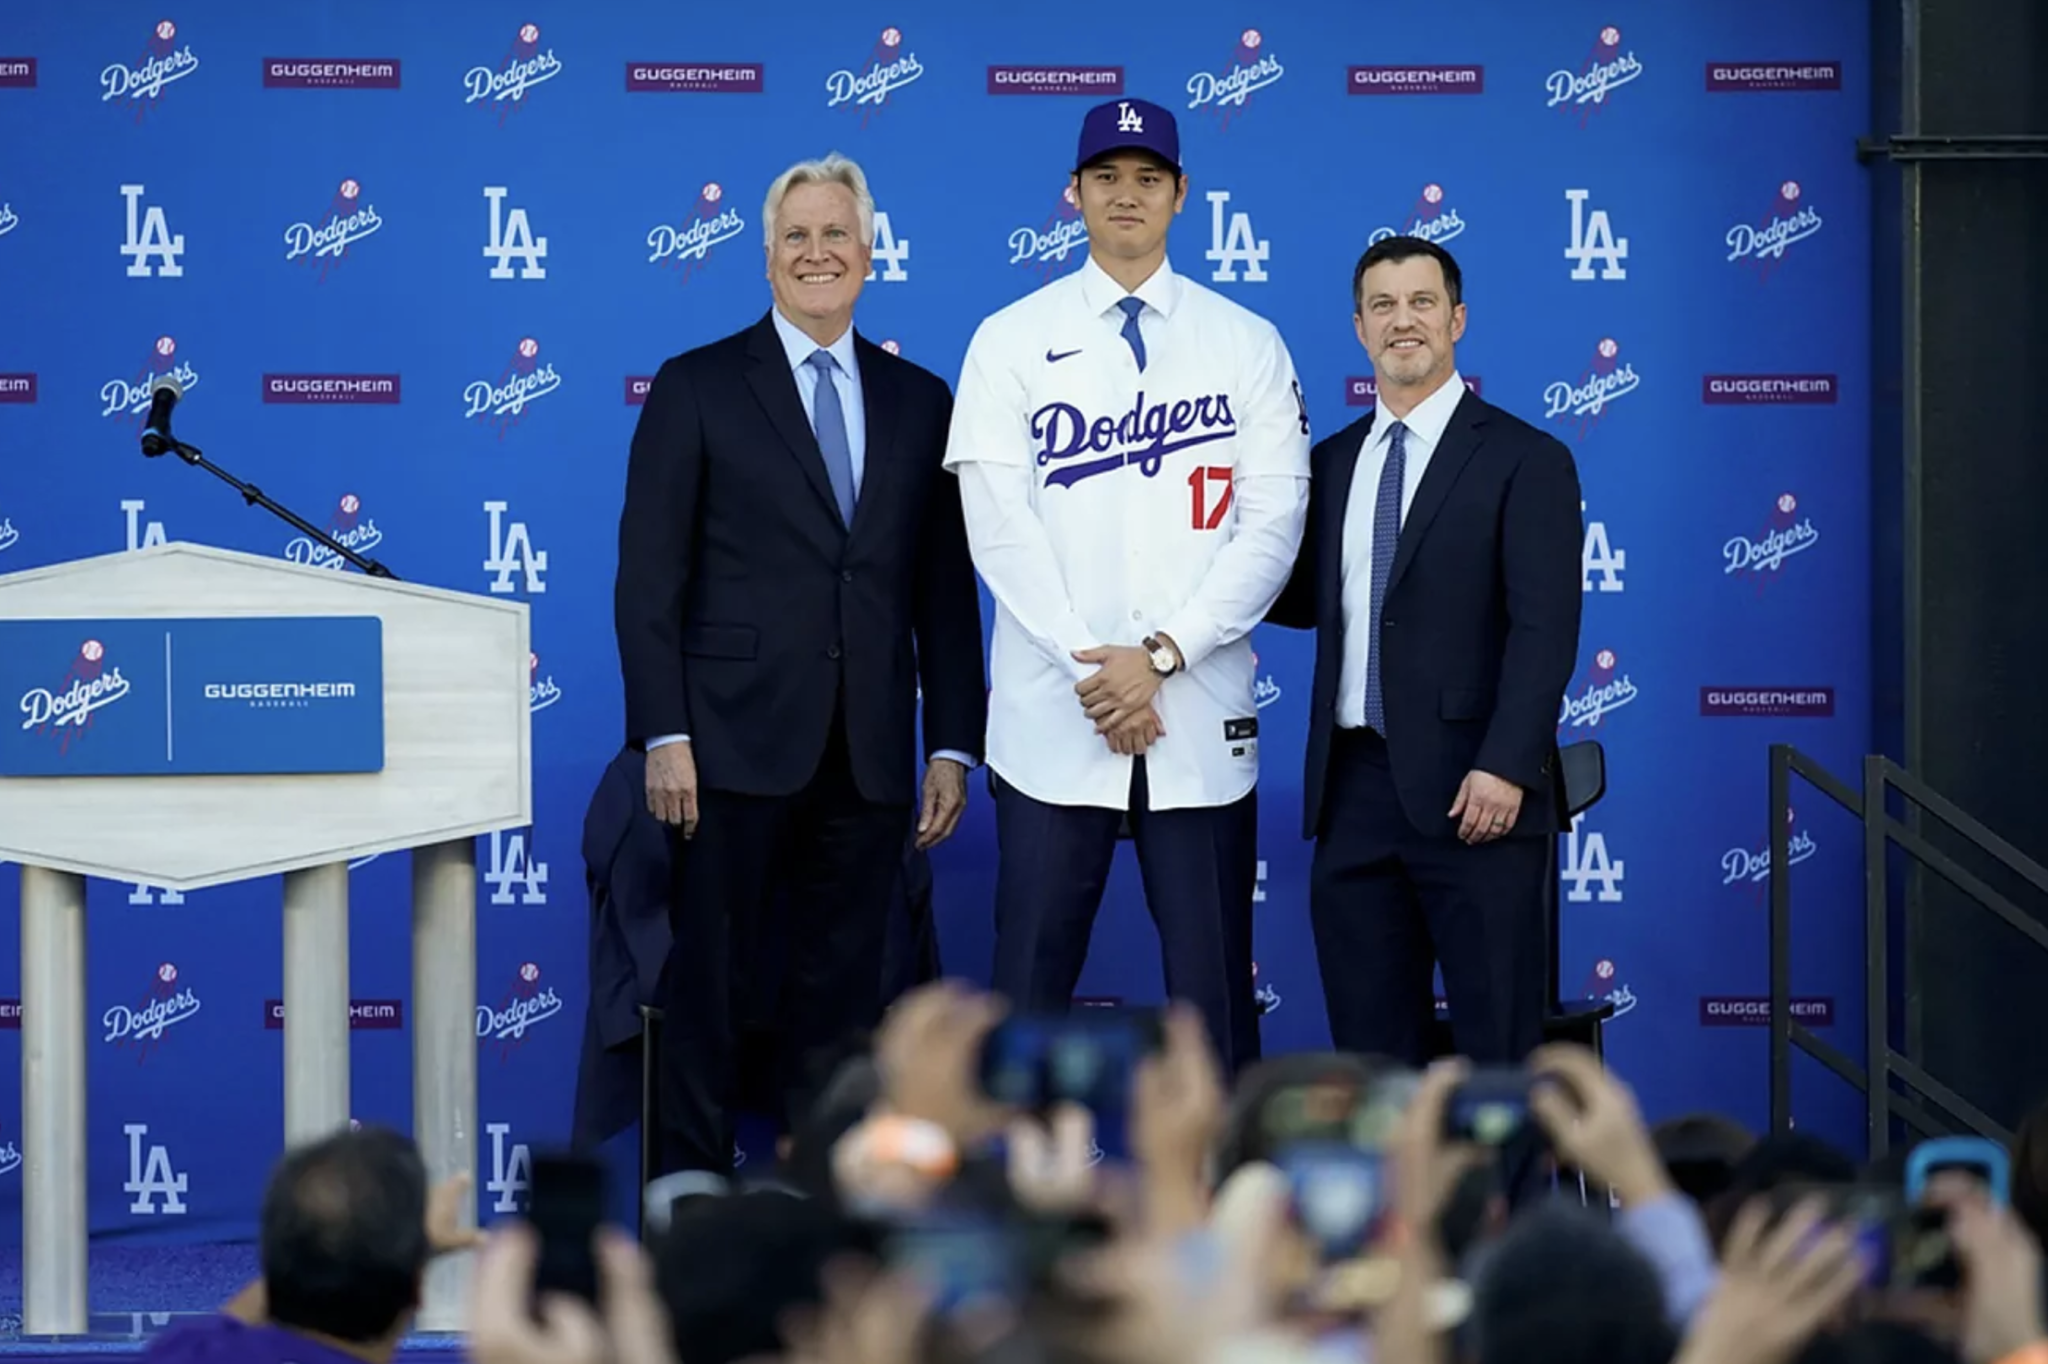 Giants player confesses annoyance over Ohtani, Yamamoto signing with LA Dodgers